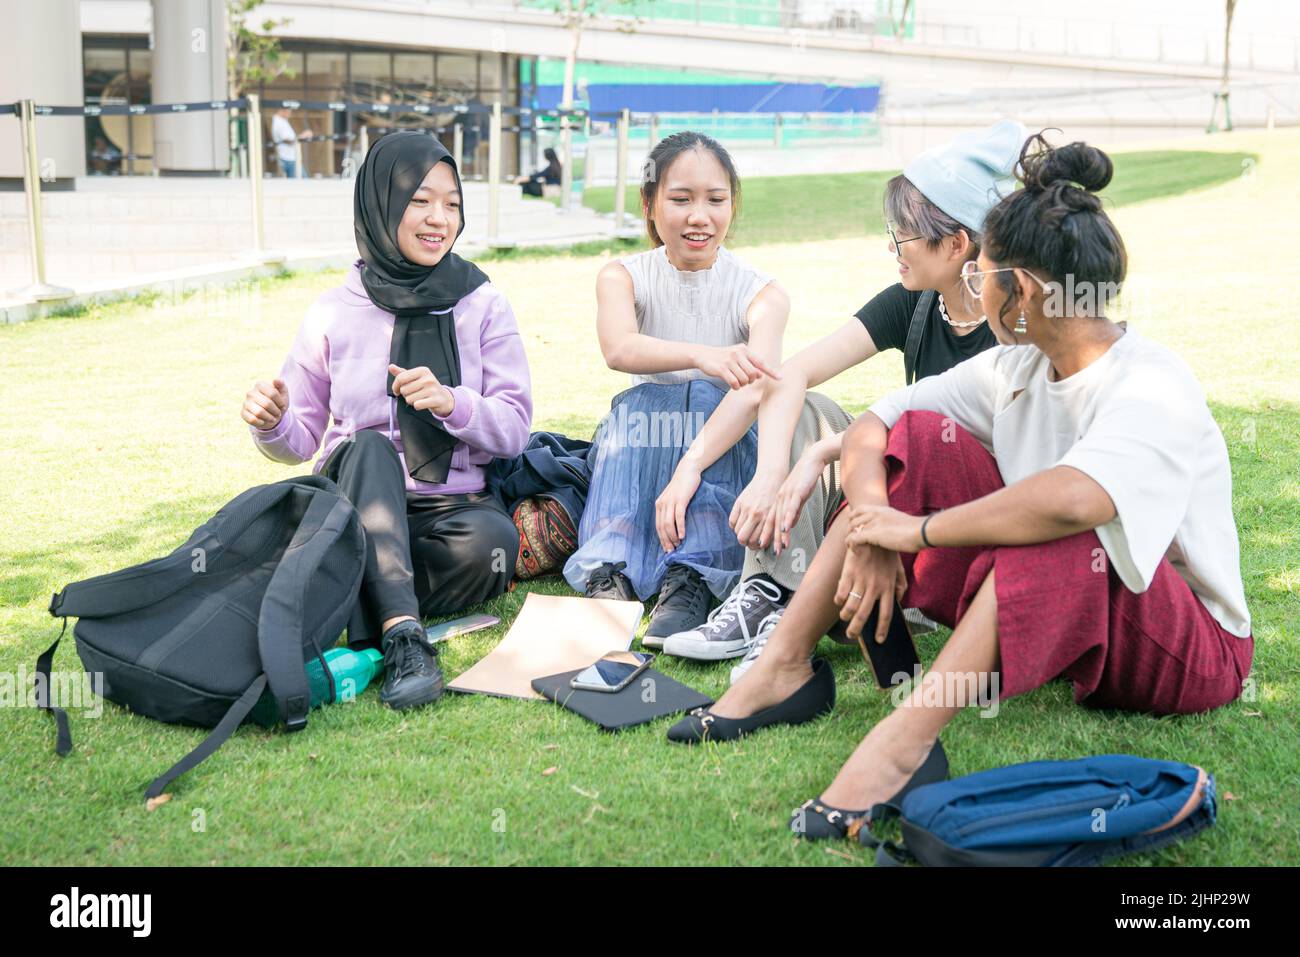 Group of four young Asian women sitting on green lawn and chatting. College students having meeting and casual discussion outdoors concept. Stock Photo